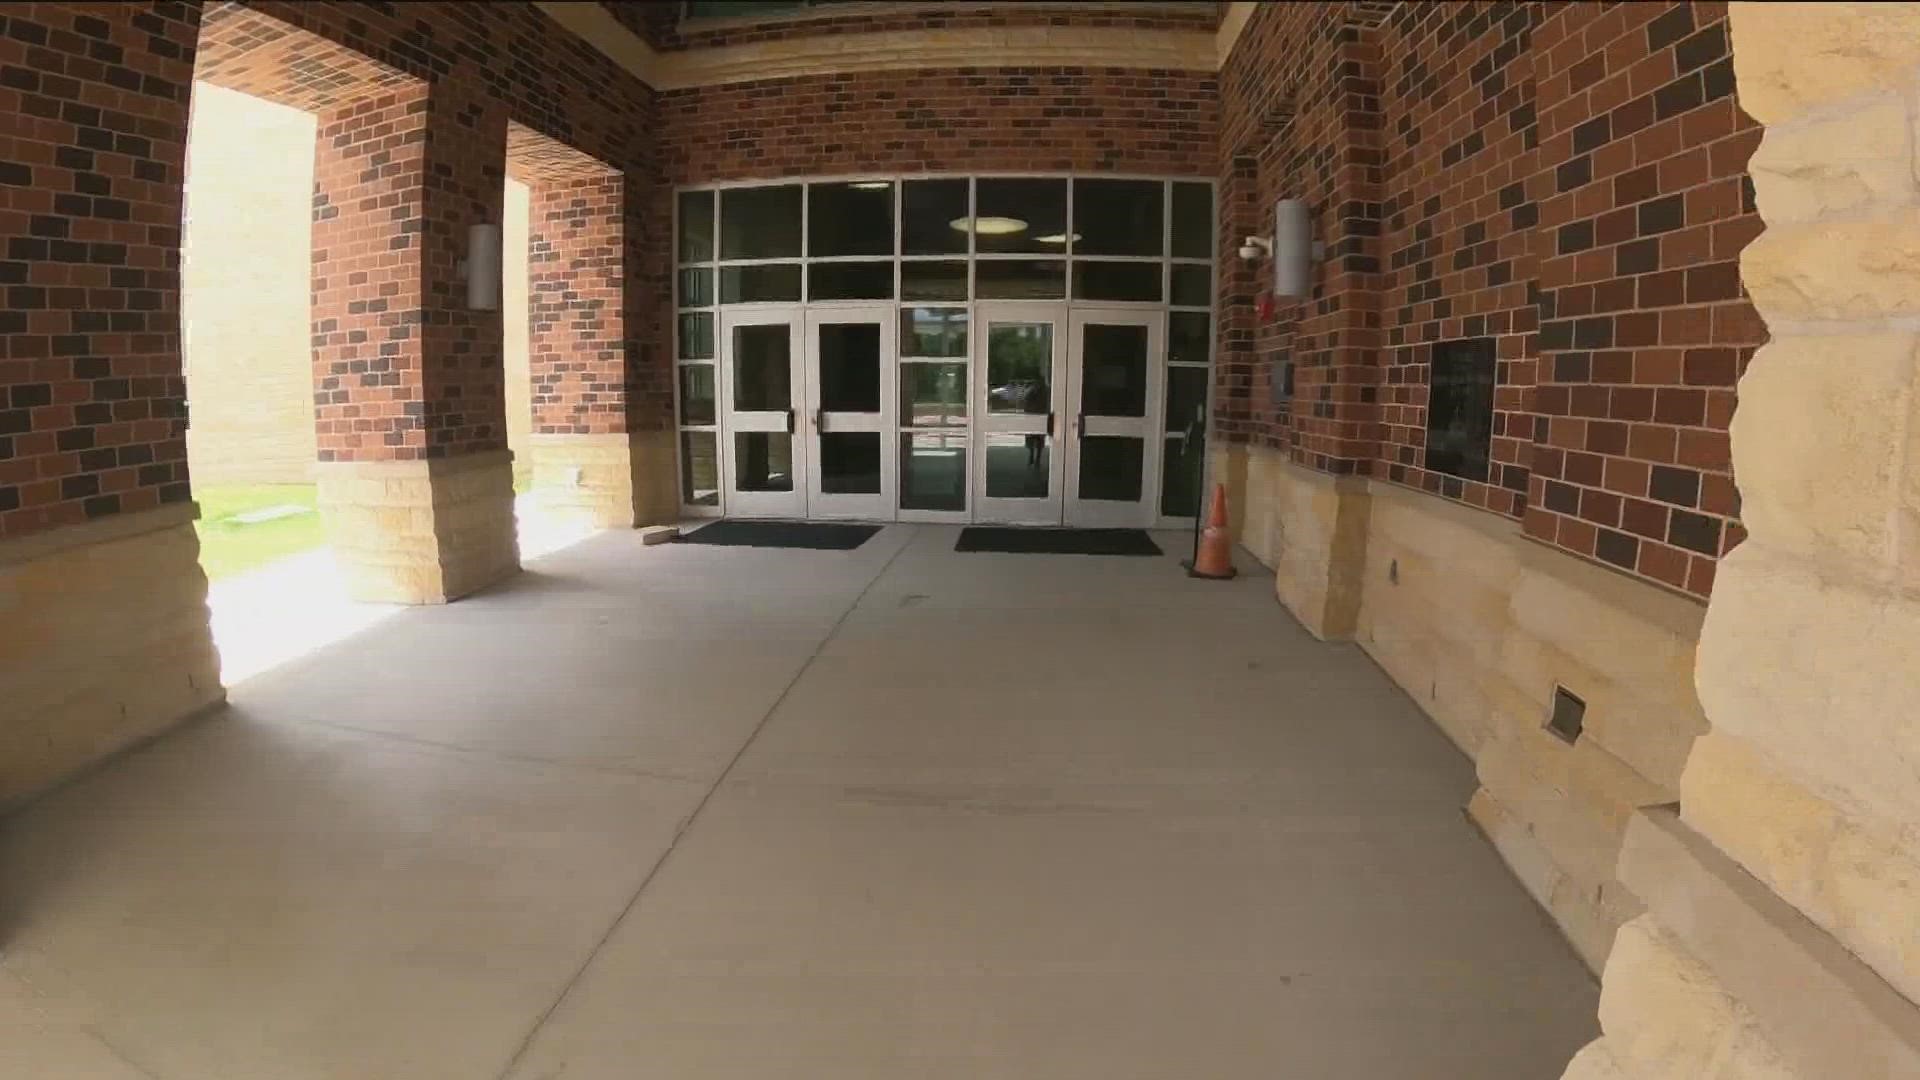 Parents tell KVUE their No. 1 worry going into the new school year is safety. The KVUE Defenders looked into local districts' safety policies.